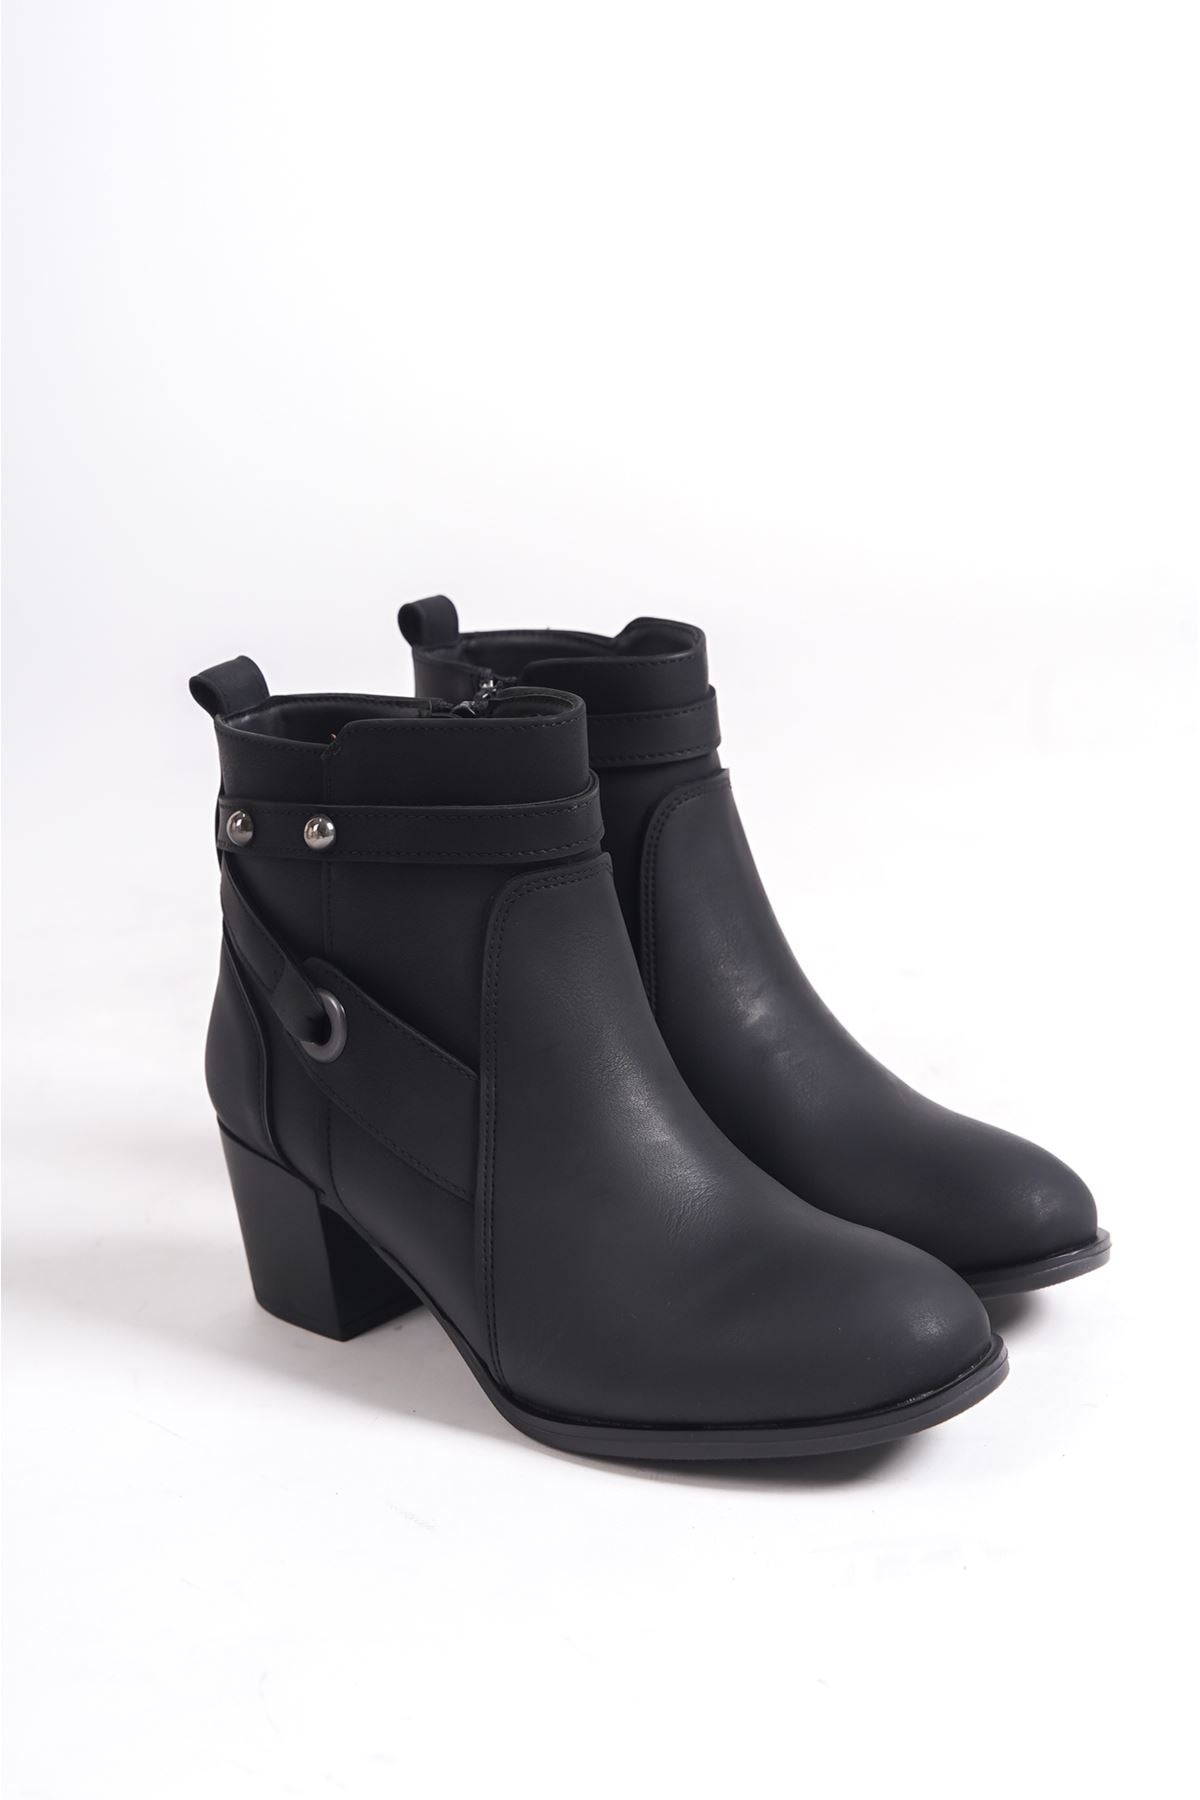 Lorin Black Thick Heeled Women's Boots - STREETMODE ™